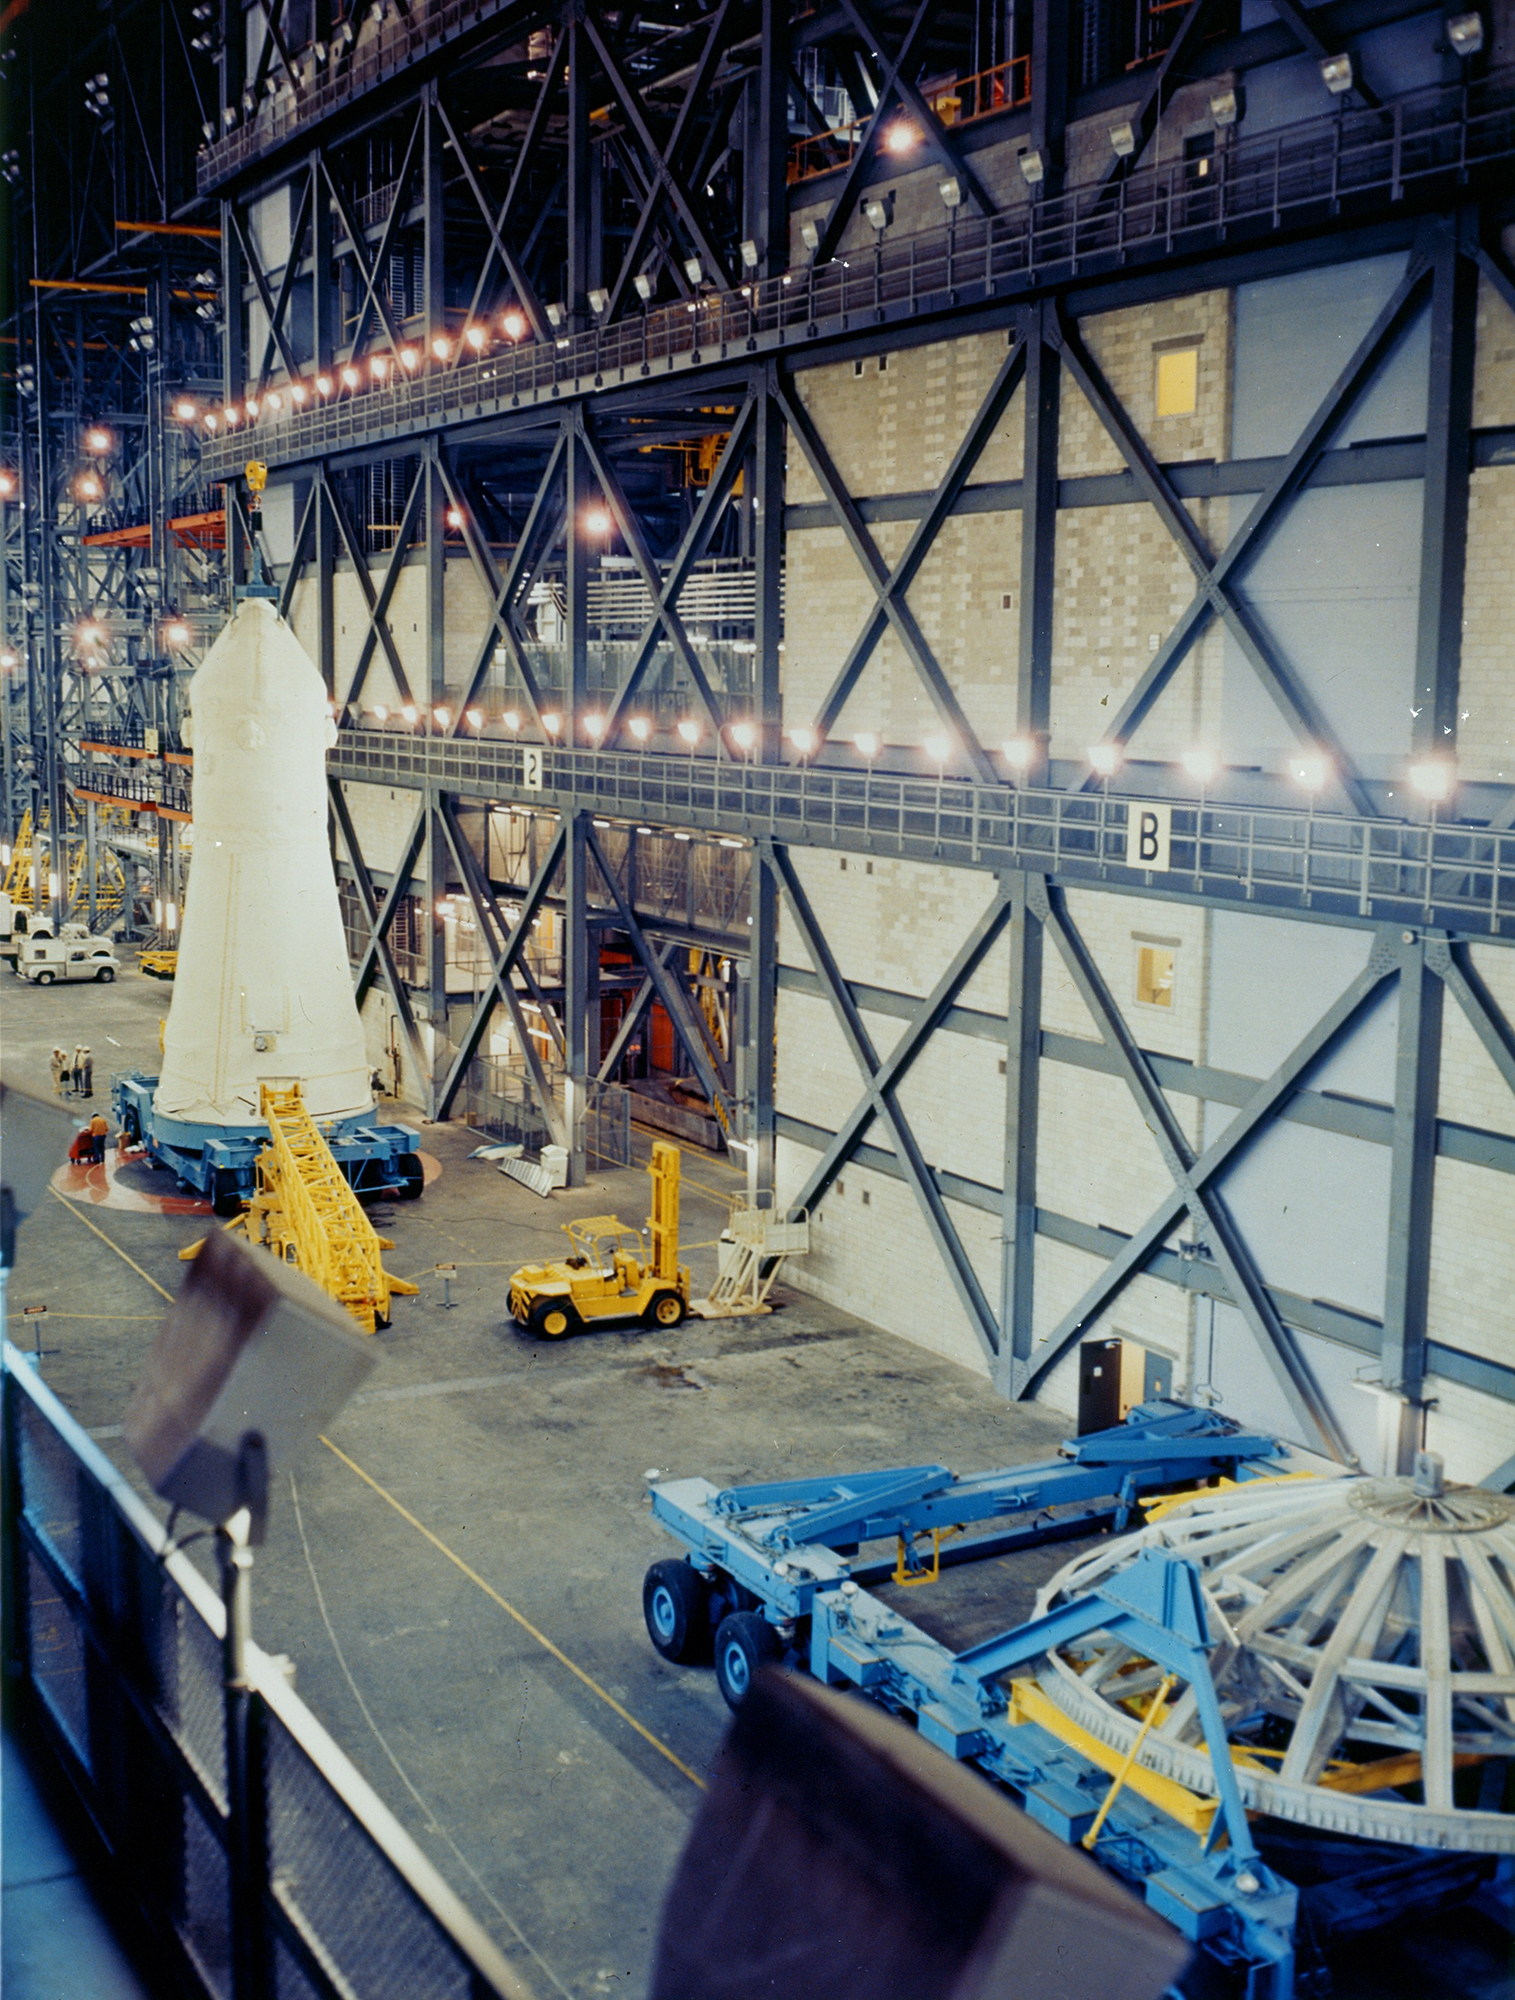 apollo-13-spacecraft-before-mating-to-launch-vehicle-in-vab.jpg